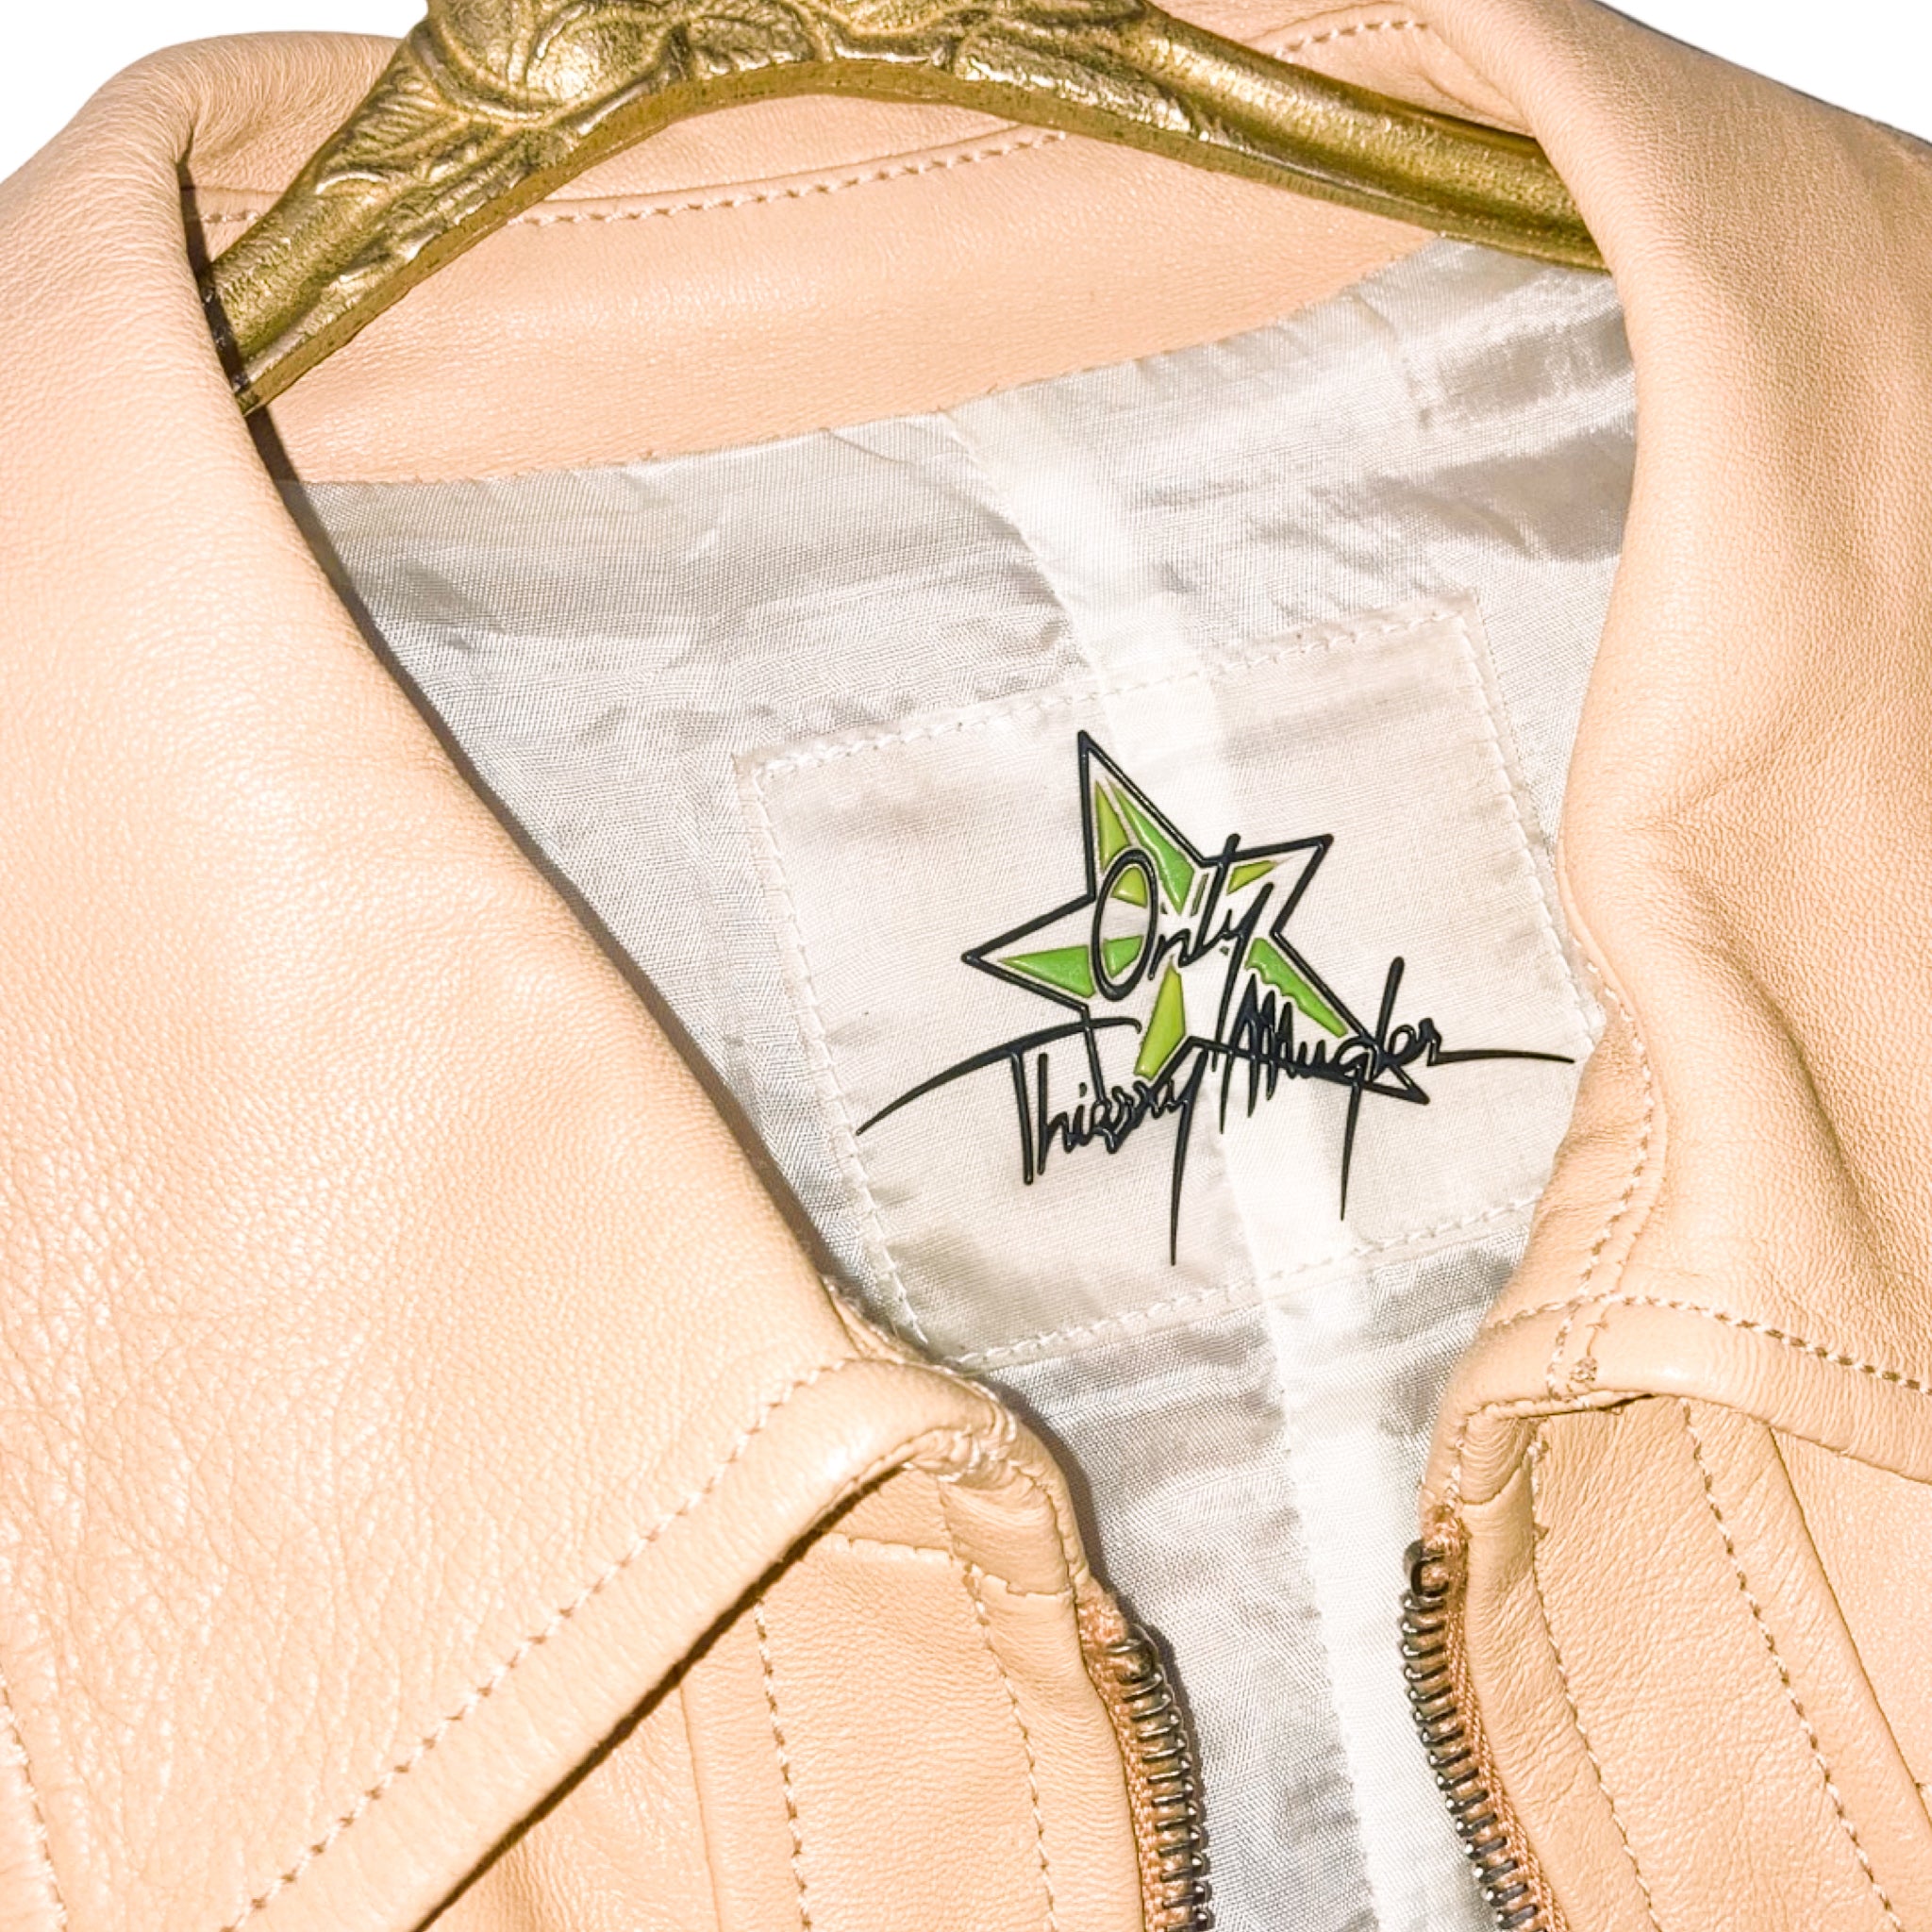 Thierry Mugler Only vintage leather jacket